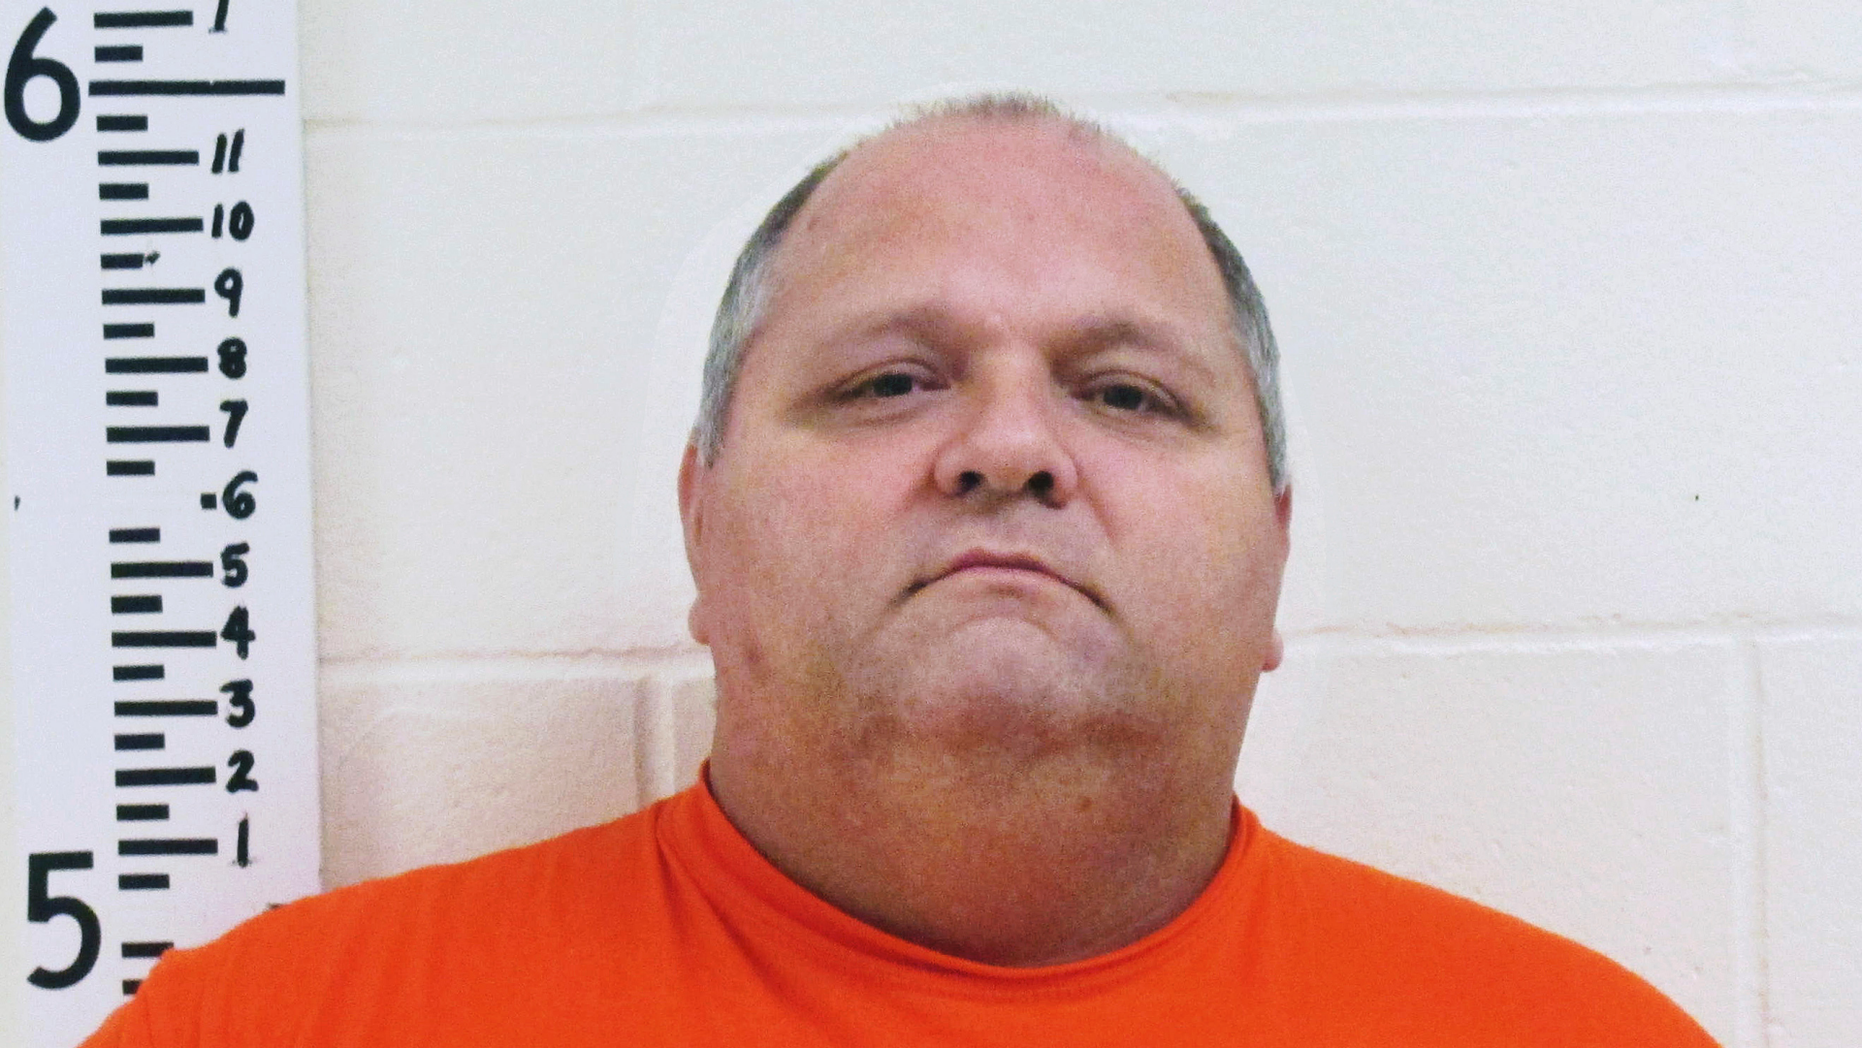 This undated booking photo published by the York County Sheriff's Department shows Michael Middleton, accused of marrying women in several states, including New Hampshire. Middleton, accused of being married to several women, pleaded guilty on Monday, April 29, 2019 to bigamy in New Hampshire, but will avoid the penalty of imprisonment if he behaves for the next five years. . (York County Sheriff's Department via AP)